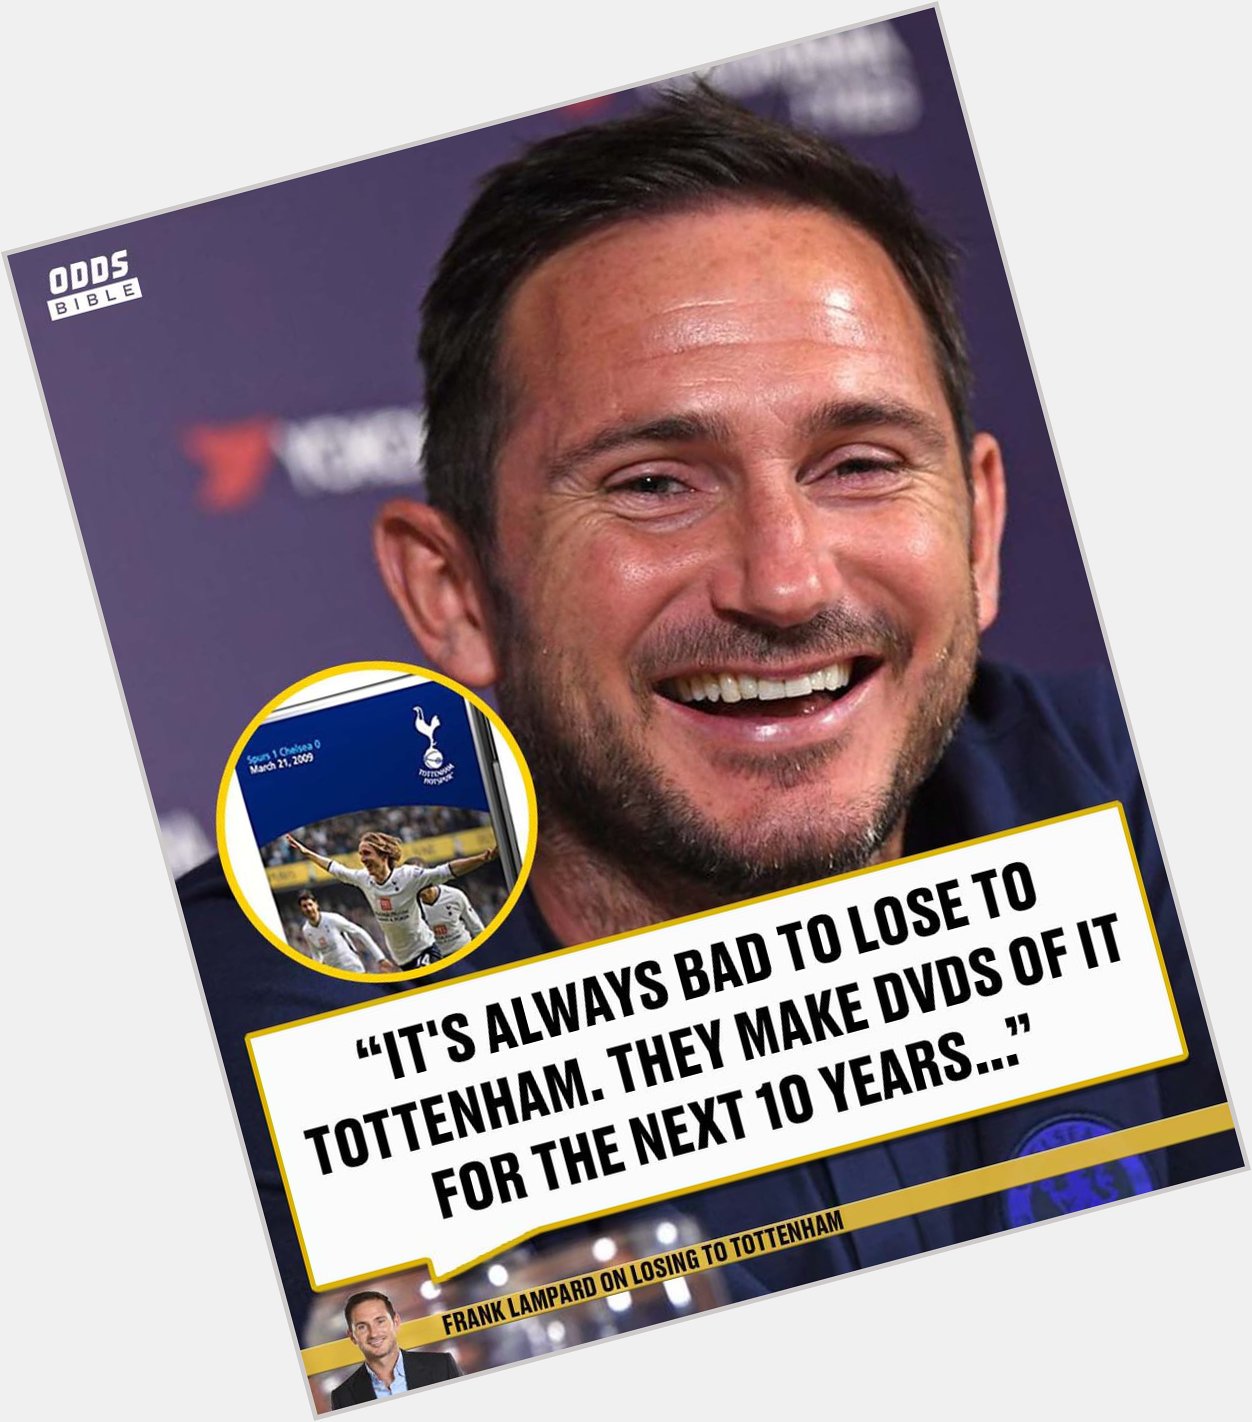 Happy Birthday Frank Lampard never forget this iconic quote  